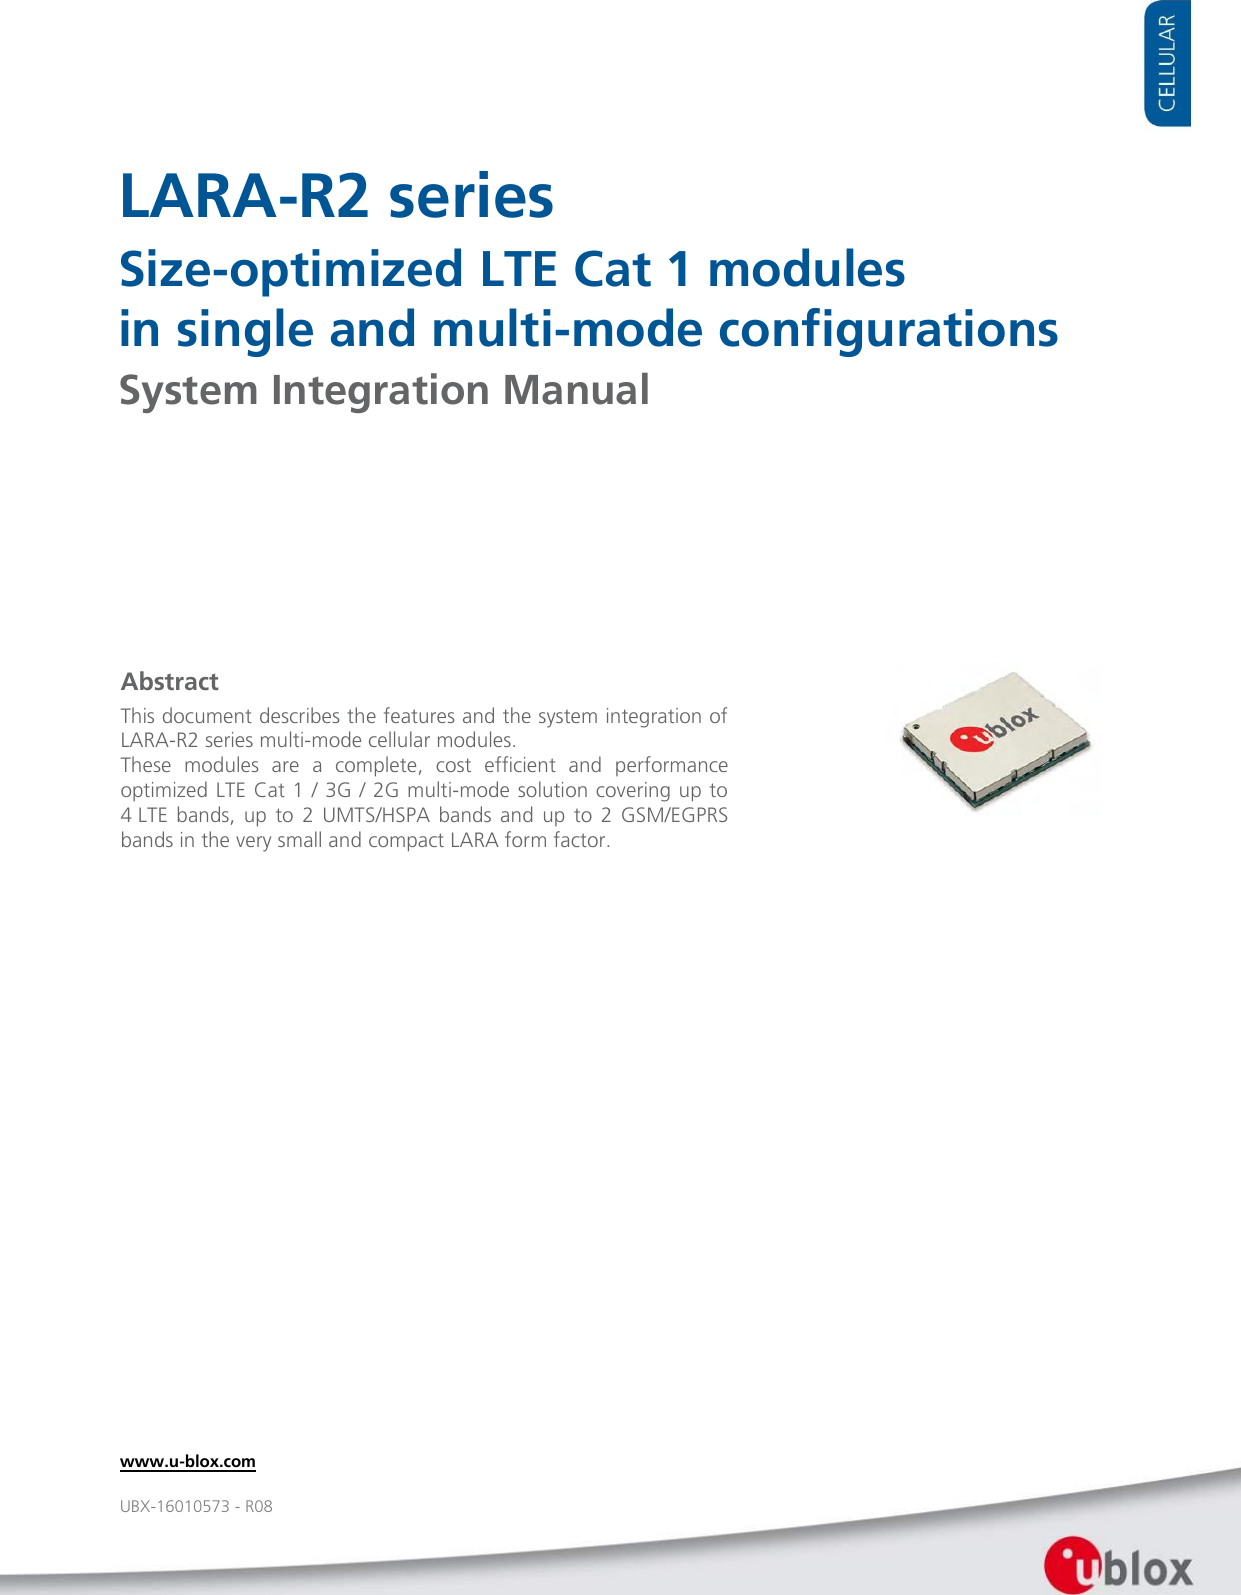     LARA-R2 series Size-optimized LTE Cat 1 modules  in single and multi-mode configurations System Integration Manual                   Abstract This document describes the features and the system integration of LARA-R2 series multi-mode cellular modules.  These  modules  are  a  complete,  cost  efficient  and  performance optimized LTE Cat 1 / 3G / 2G multi-mode solution covering up to 4 LTE  bands,  up to  2 UMTS/HSPA  bands  and  up to  2  GSM/EGPRS bands in the very small and compact LARA form factor.  www.u-blox.com UBX-16010573 - R08 